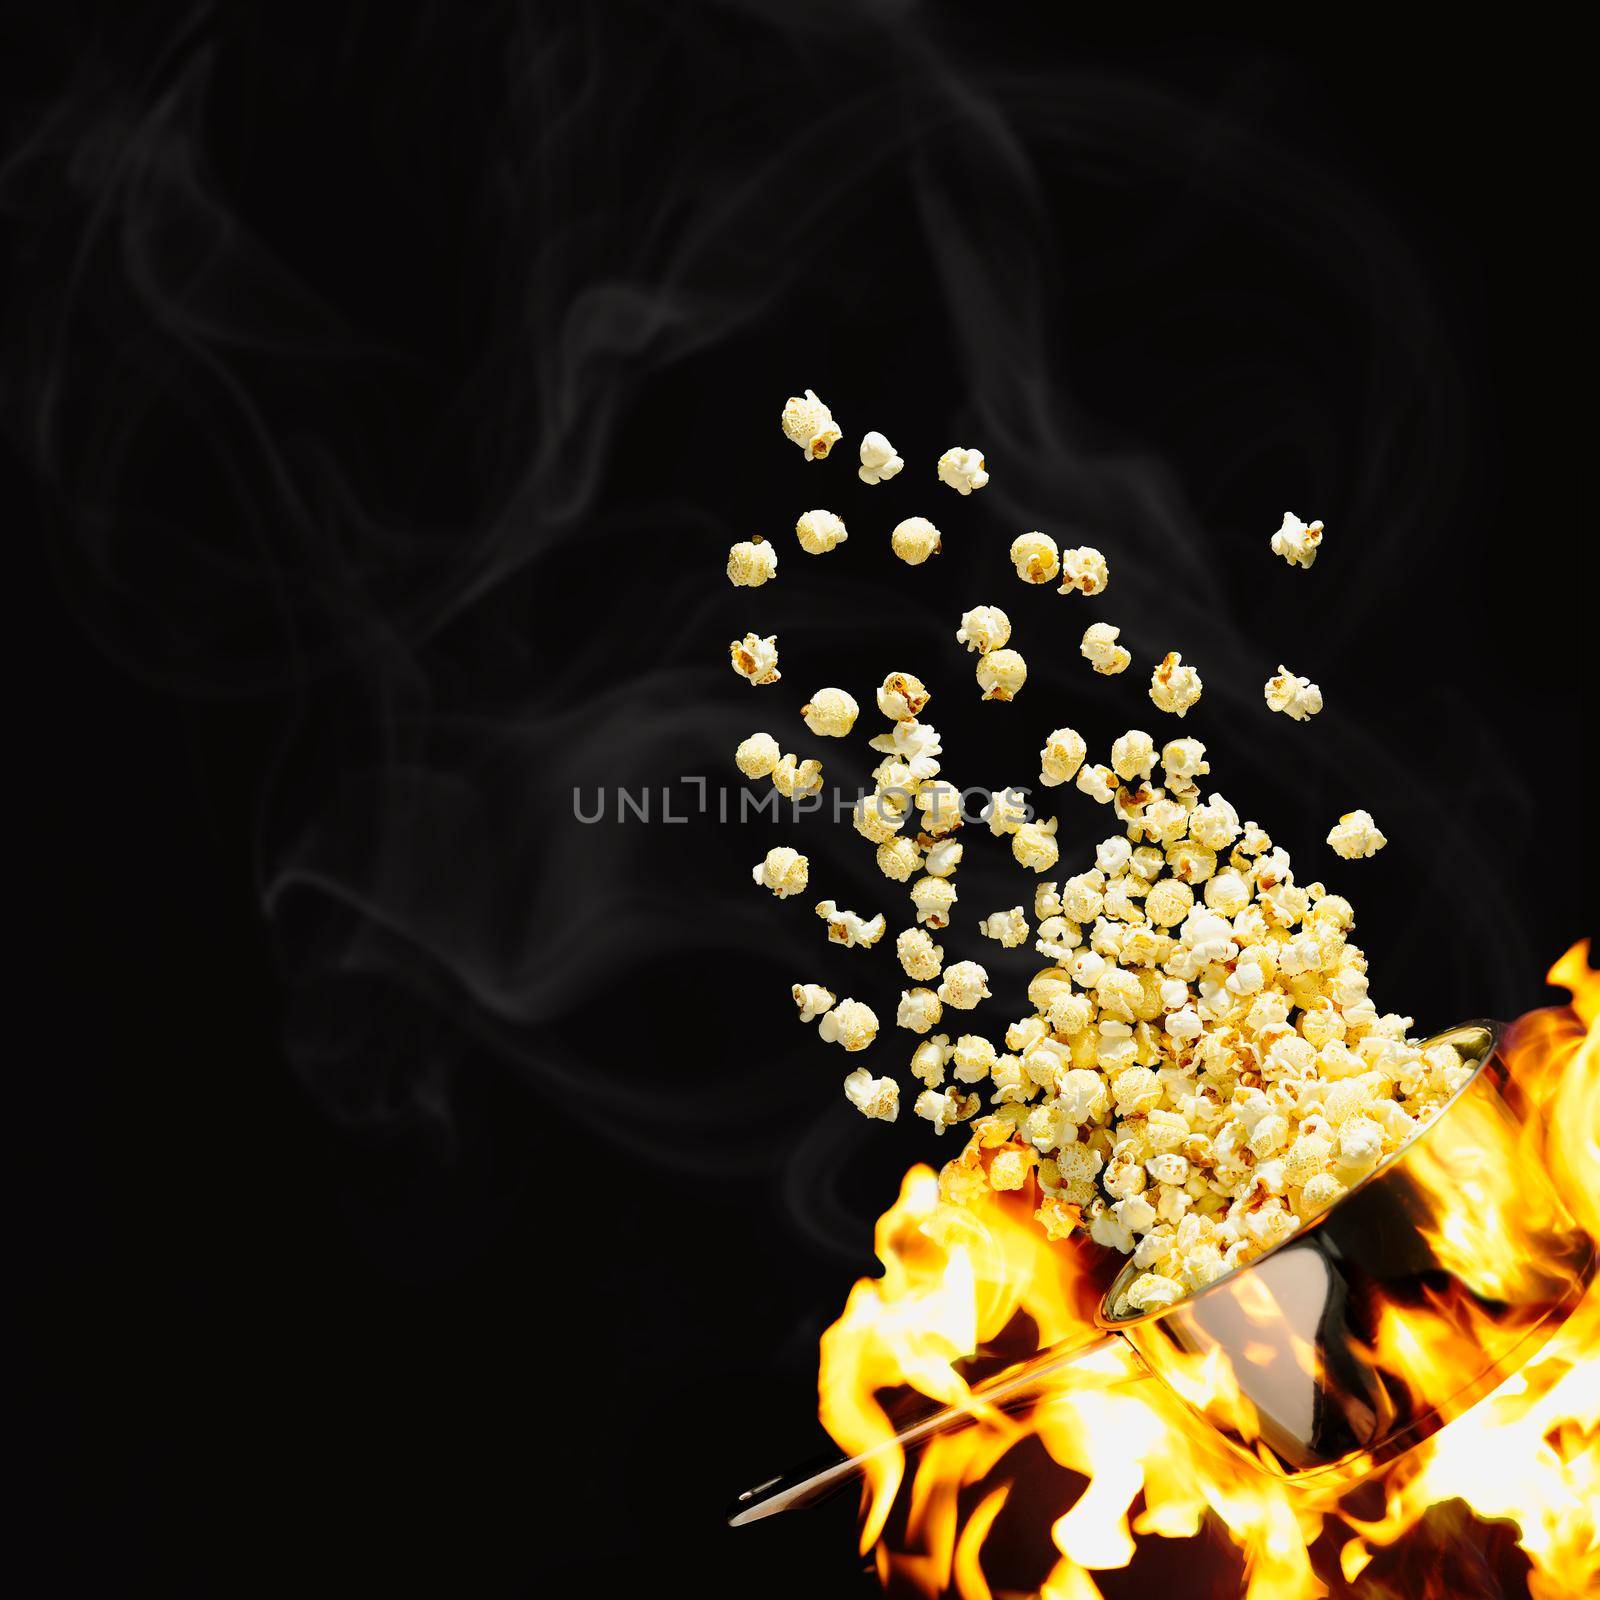 Flying popcorn on a dark background. Hot popcorn flying from pot under fire. Advertising concept. by PhotoTime